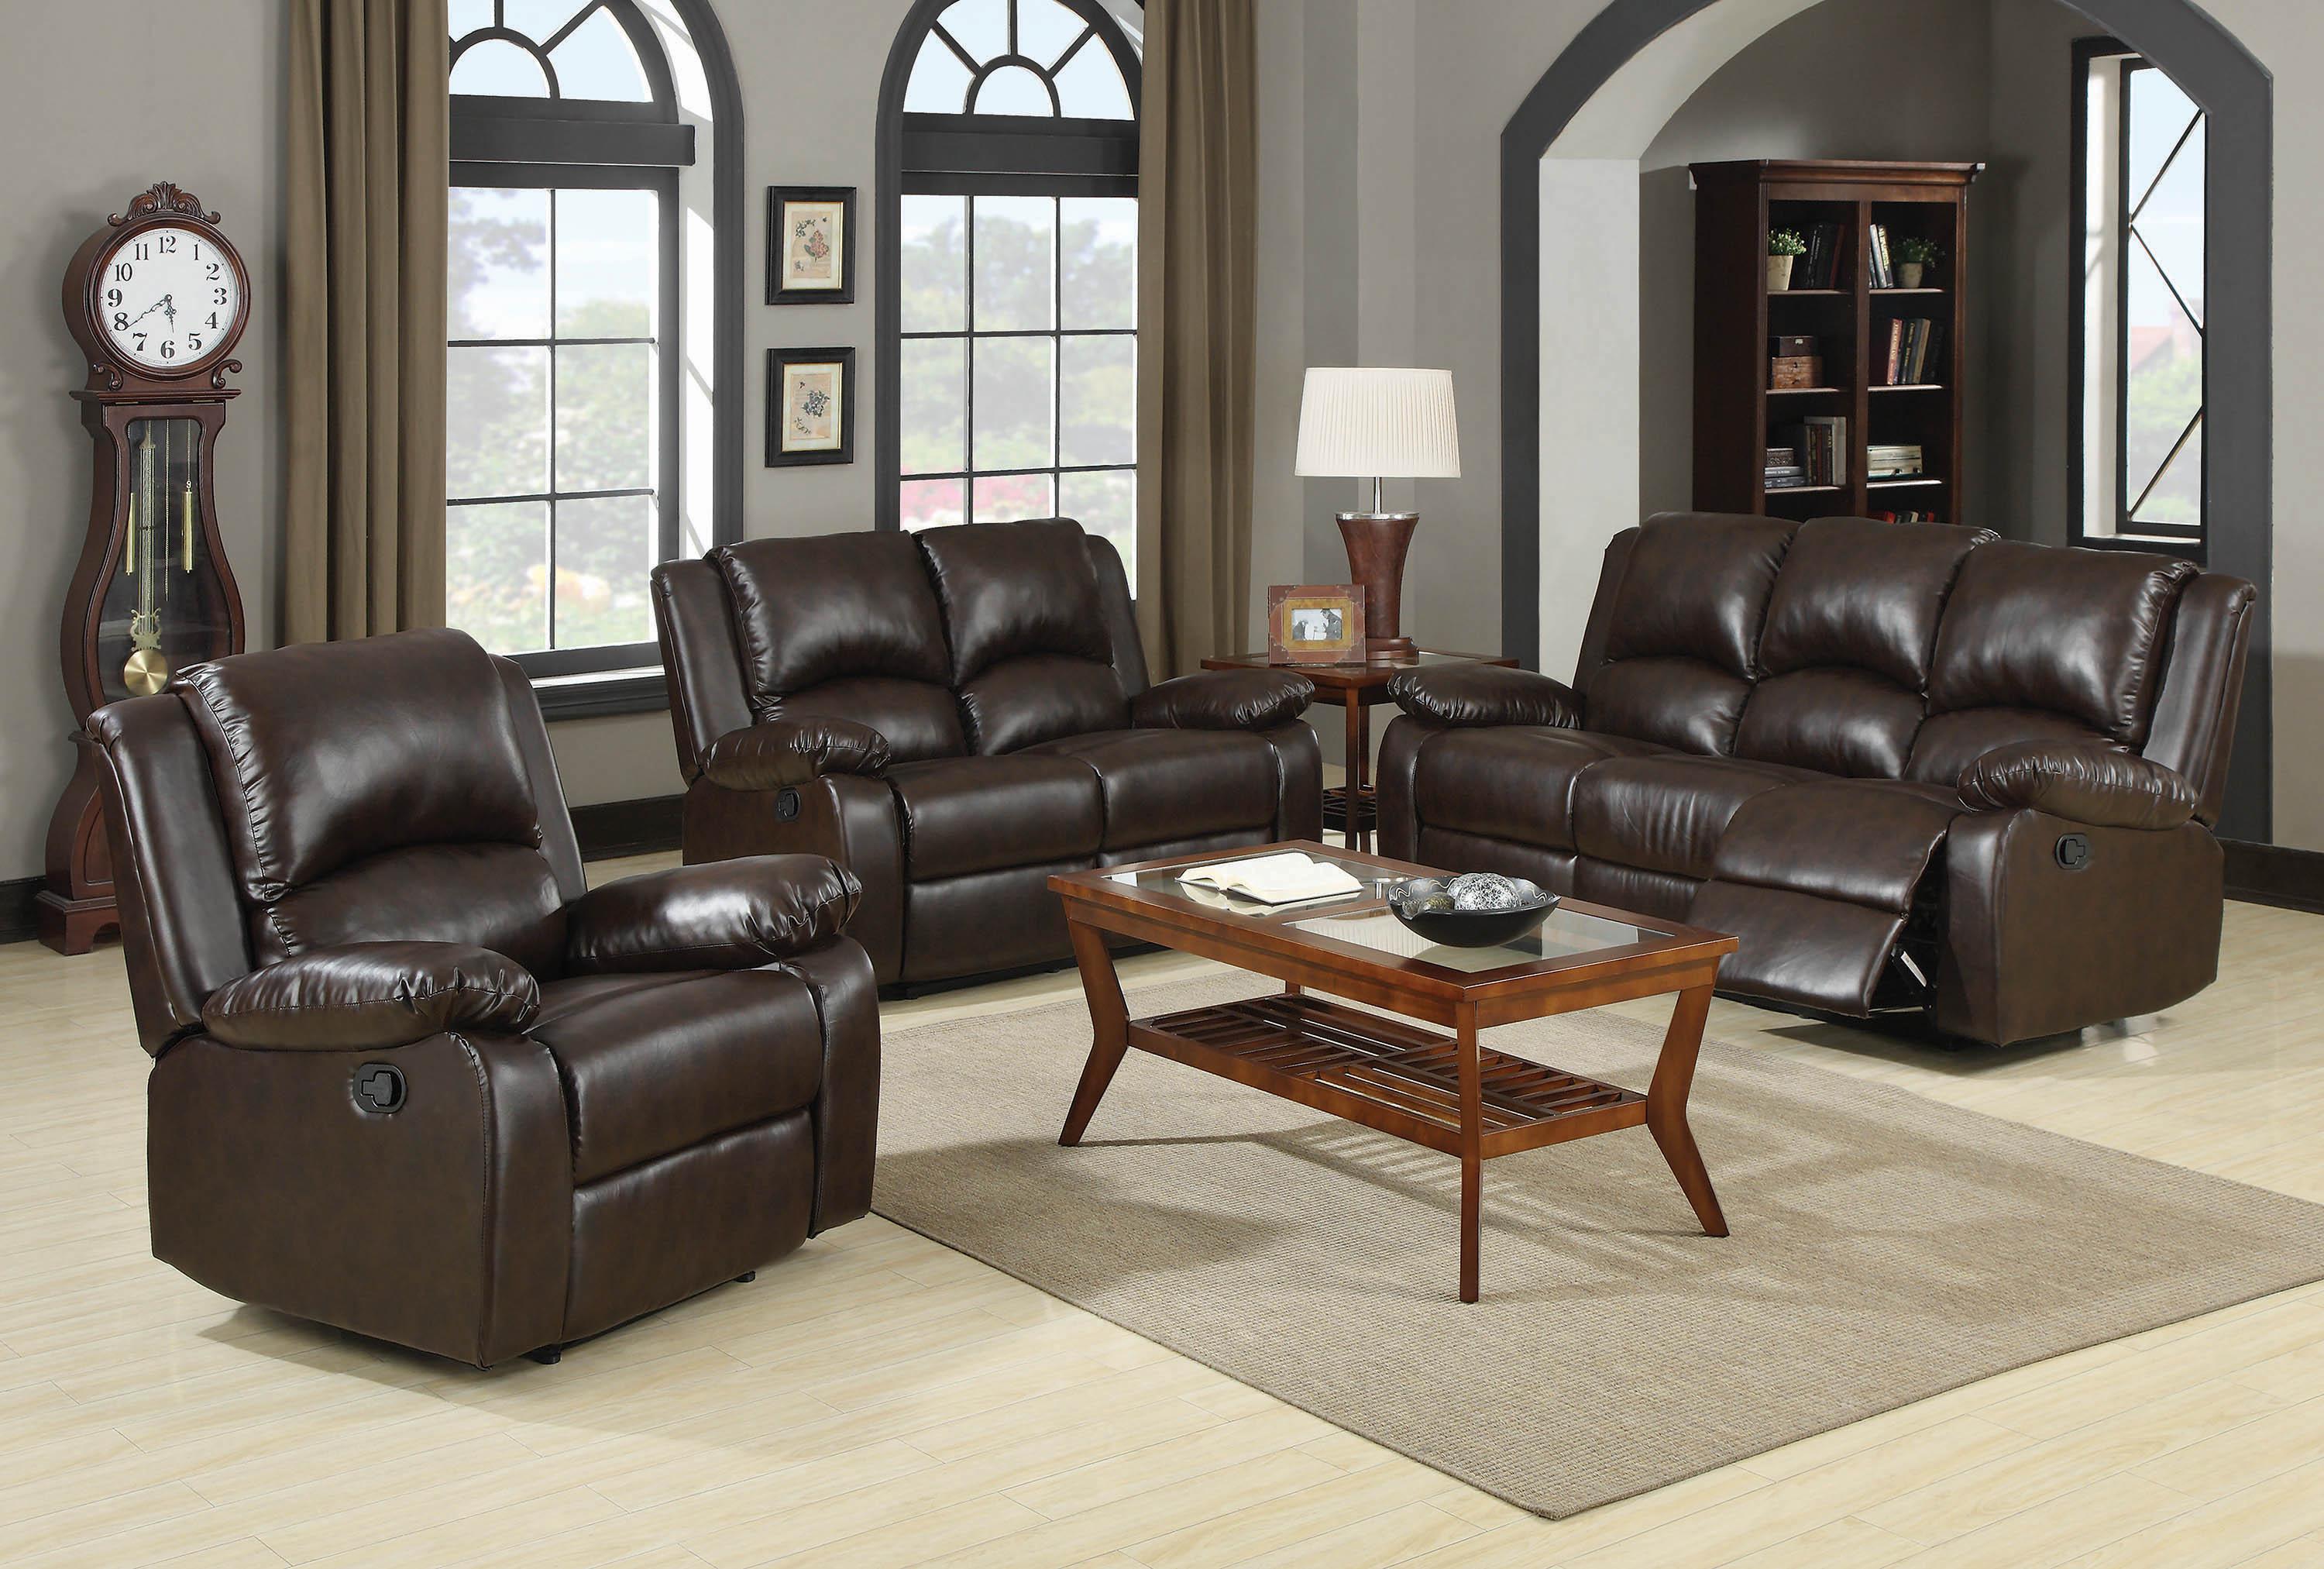 Transitional Living Room Set 600971-S2 Boston 600971-S2 in Brown Leatherette